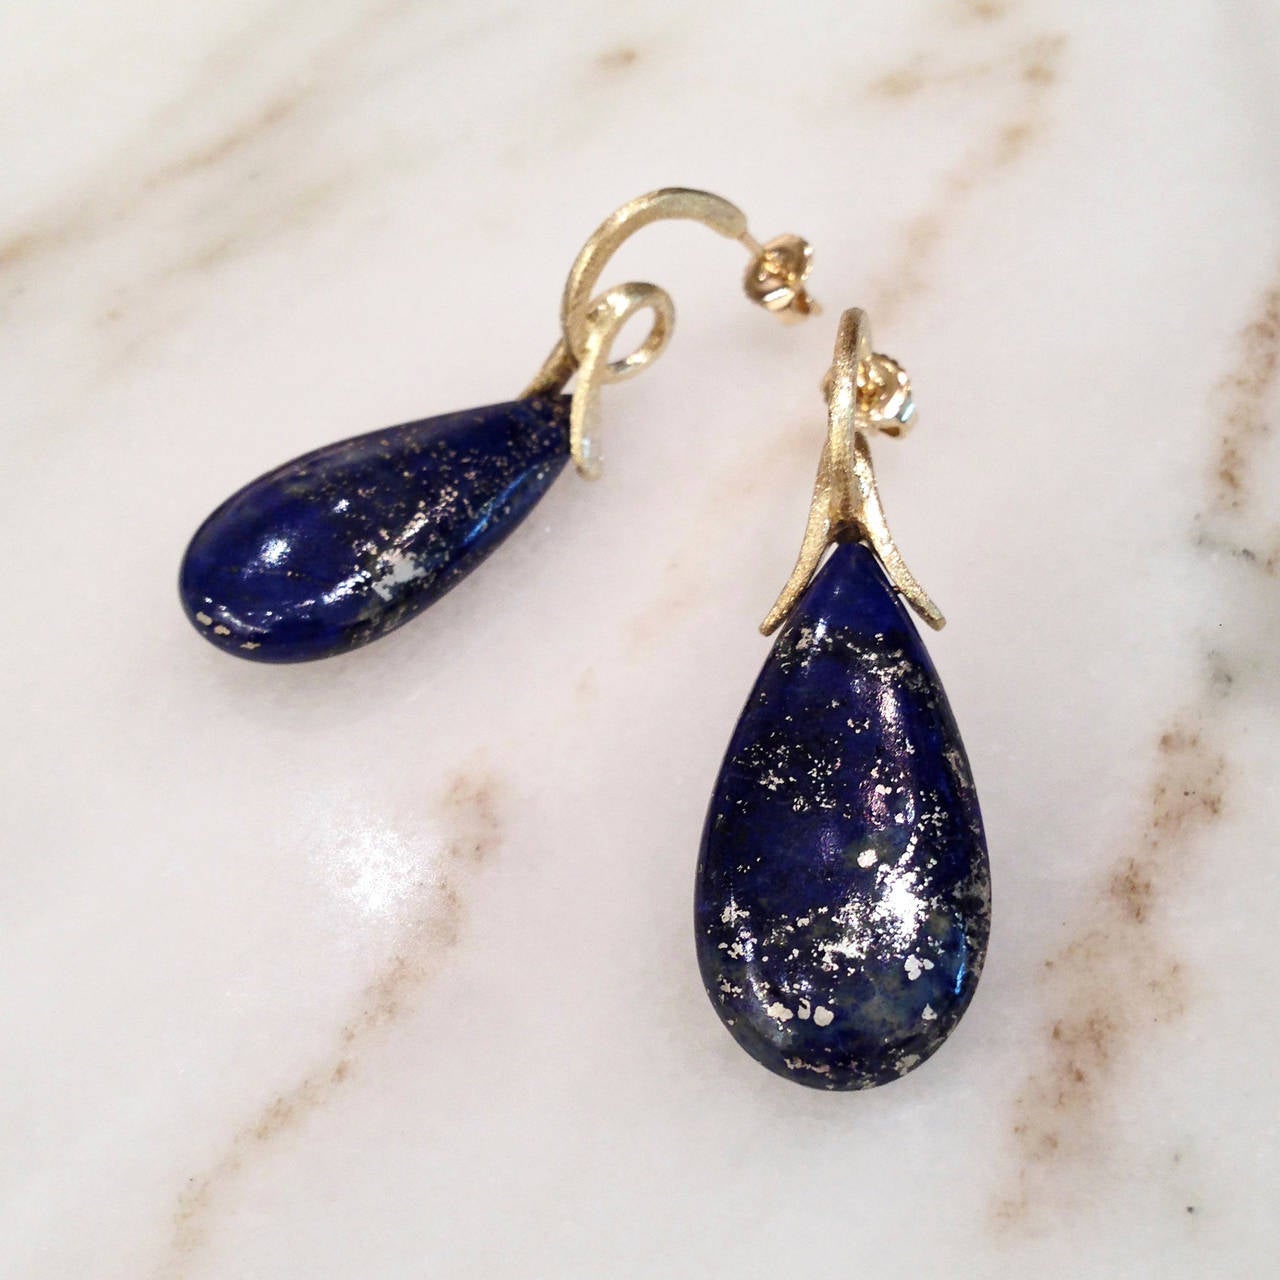 One-of-a-Kind Loop Earrings handcrafted in satin 18k yellow gold with lapis lazuli drops exhibiting stunning golden accents.